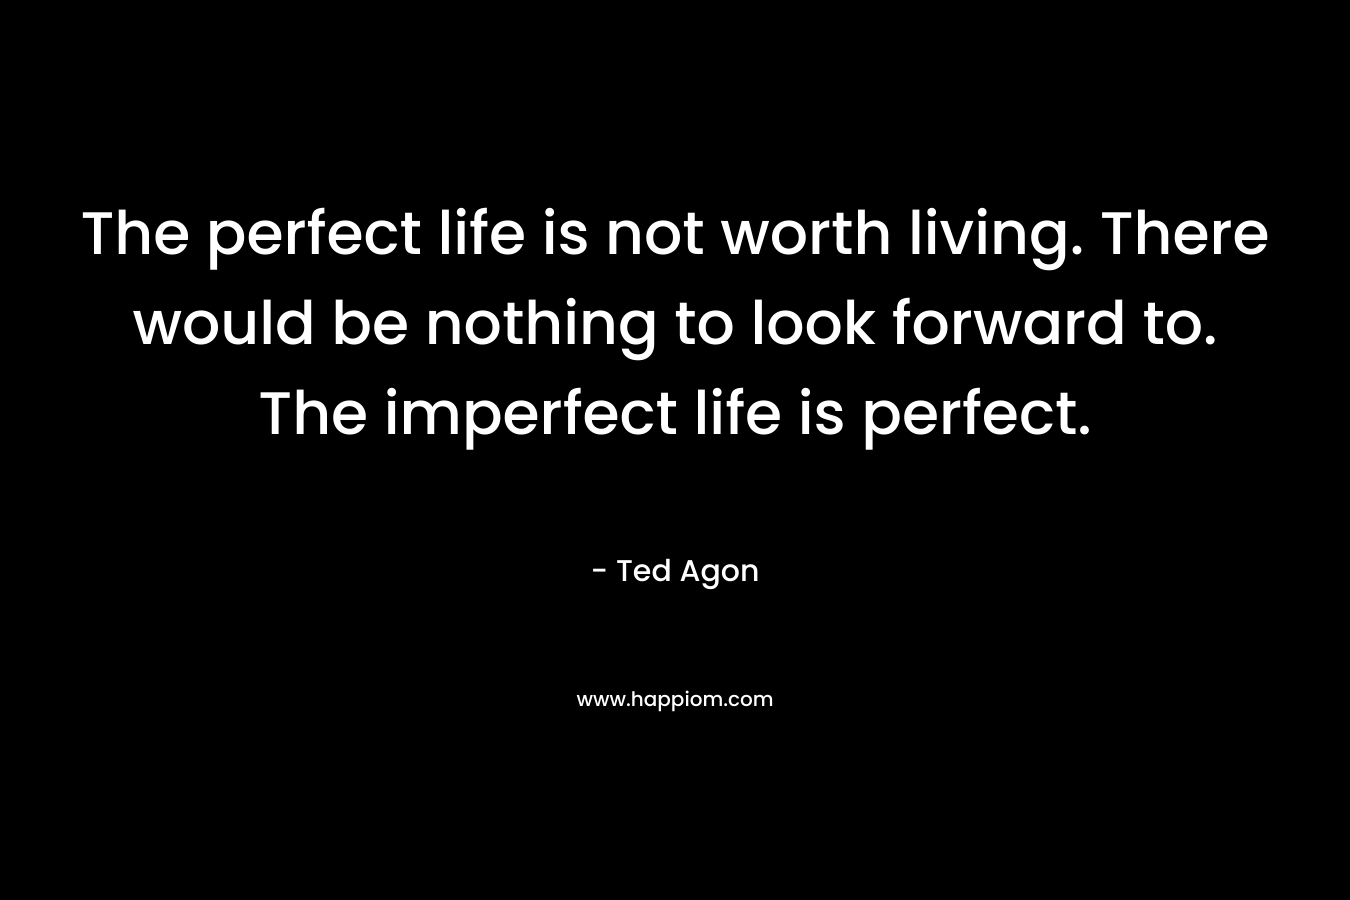 The perfect life is not worth living. There would be nothing to look forward to. The imperfect life is perfect.